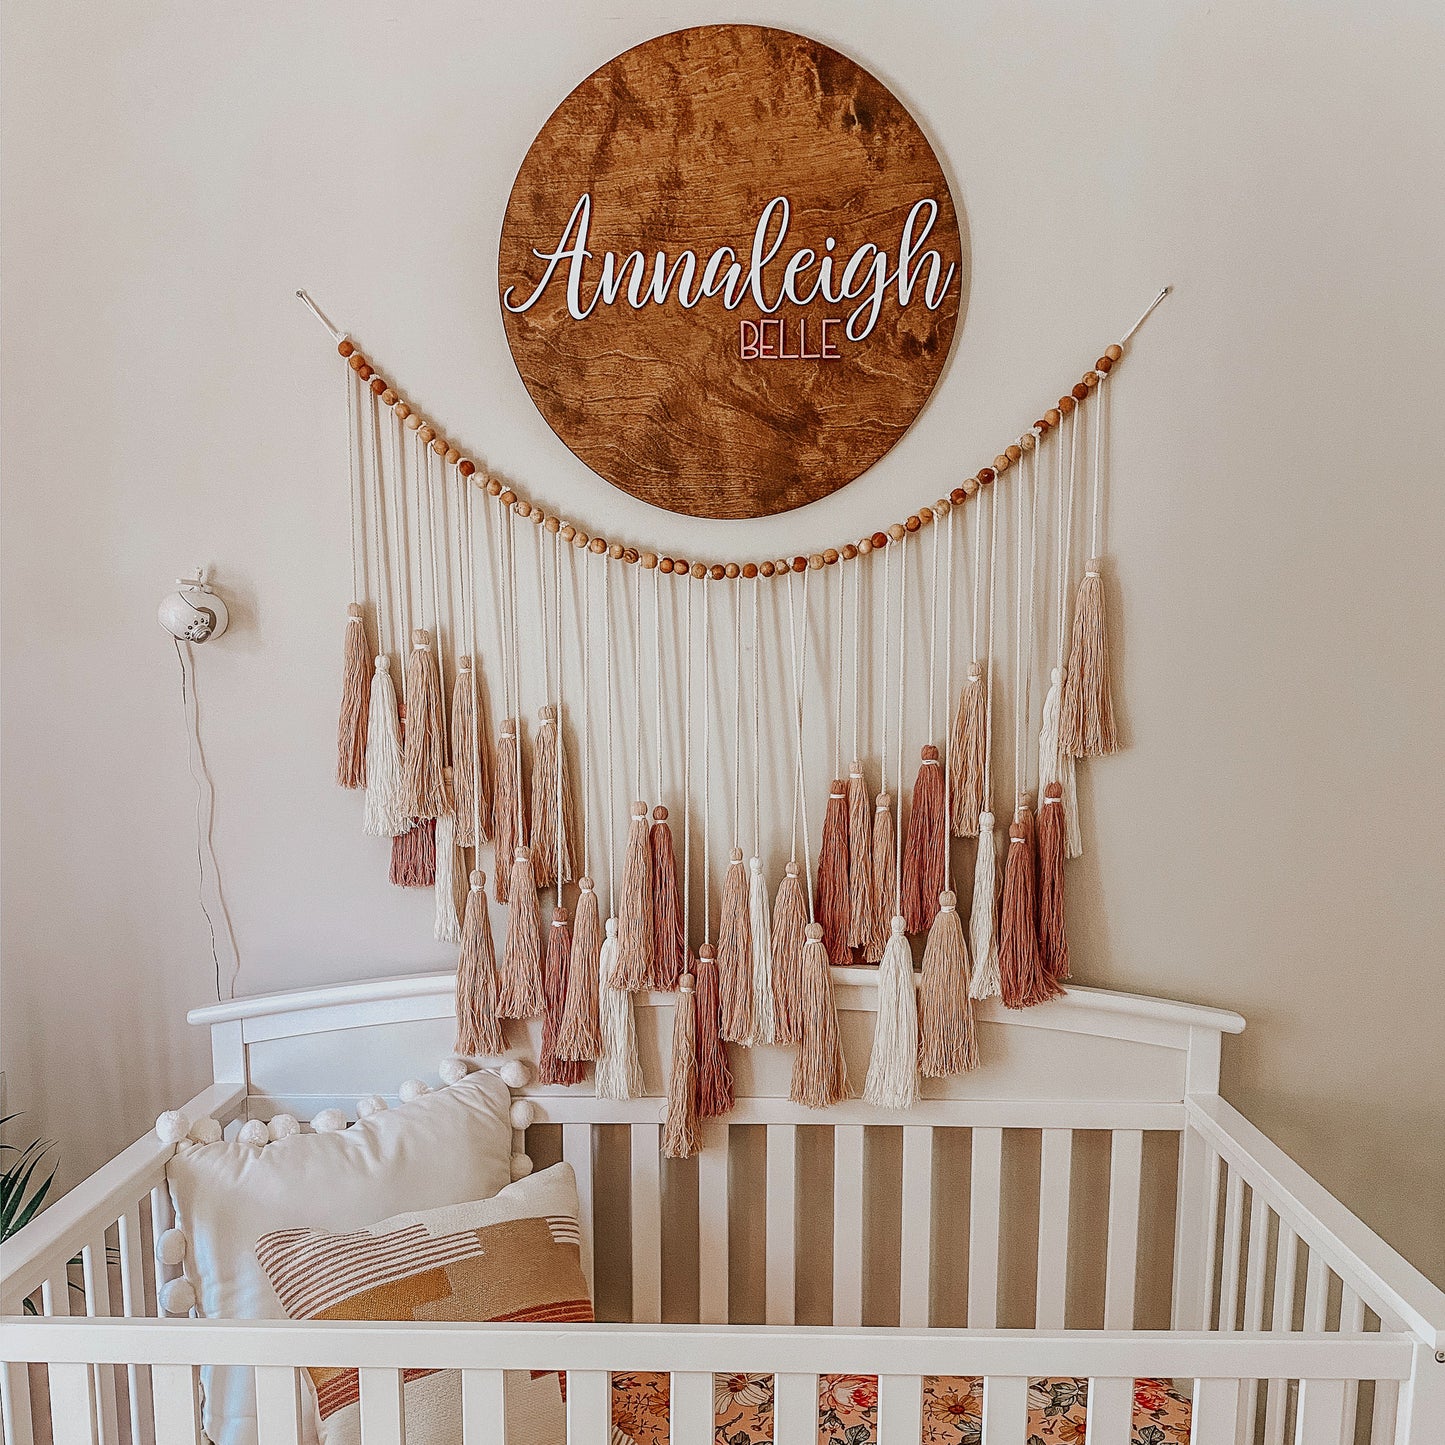 Annaleigh Belle Round Name Sign